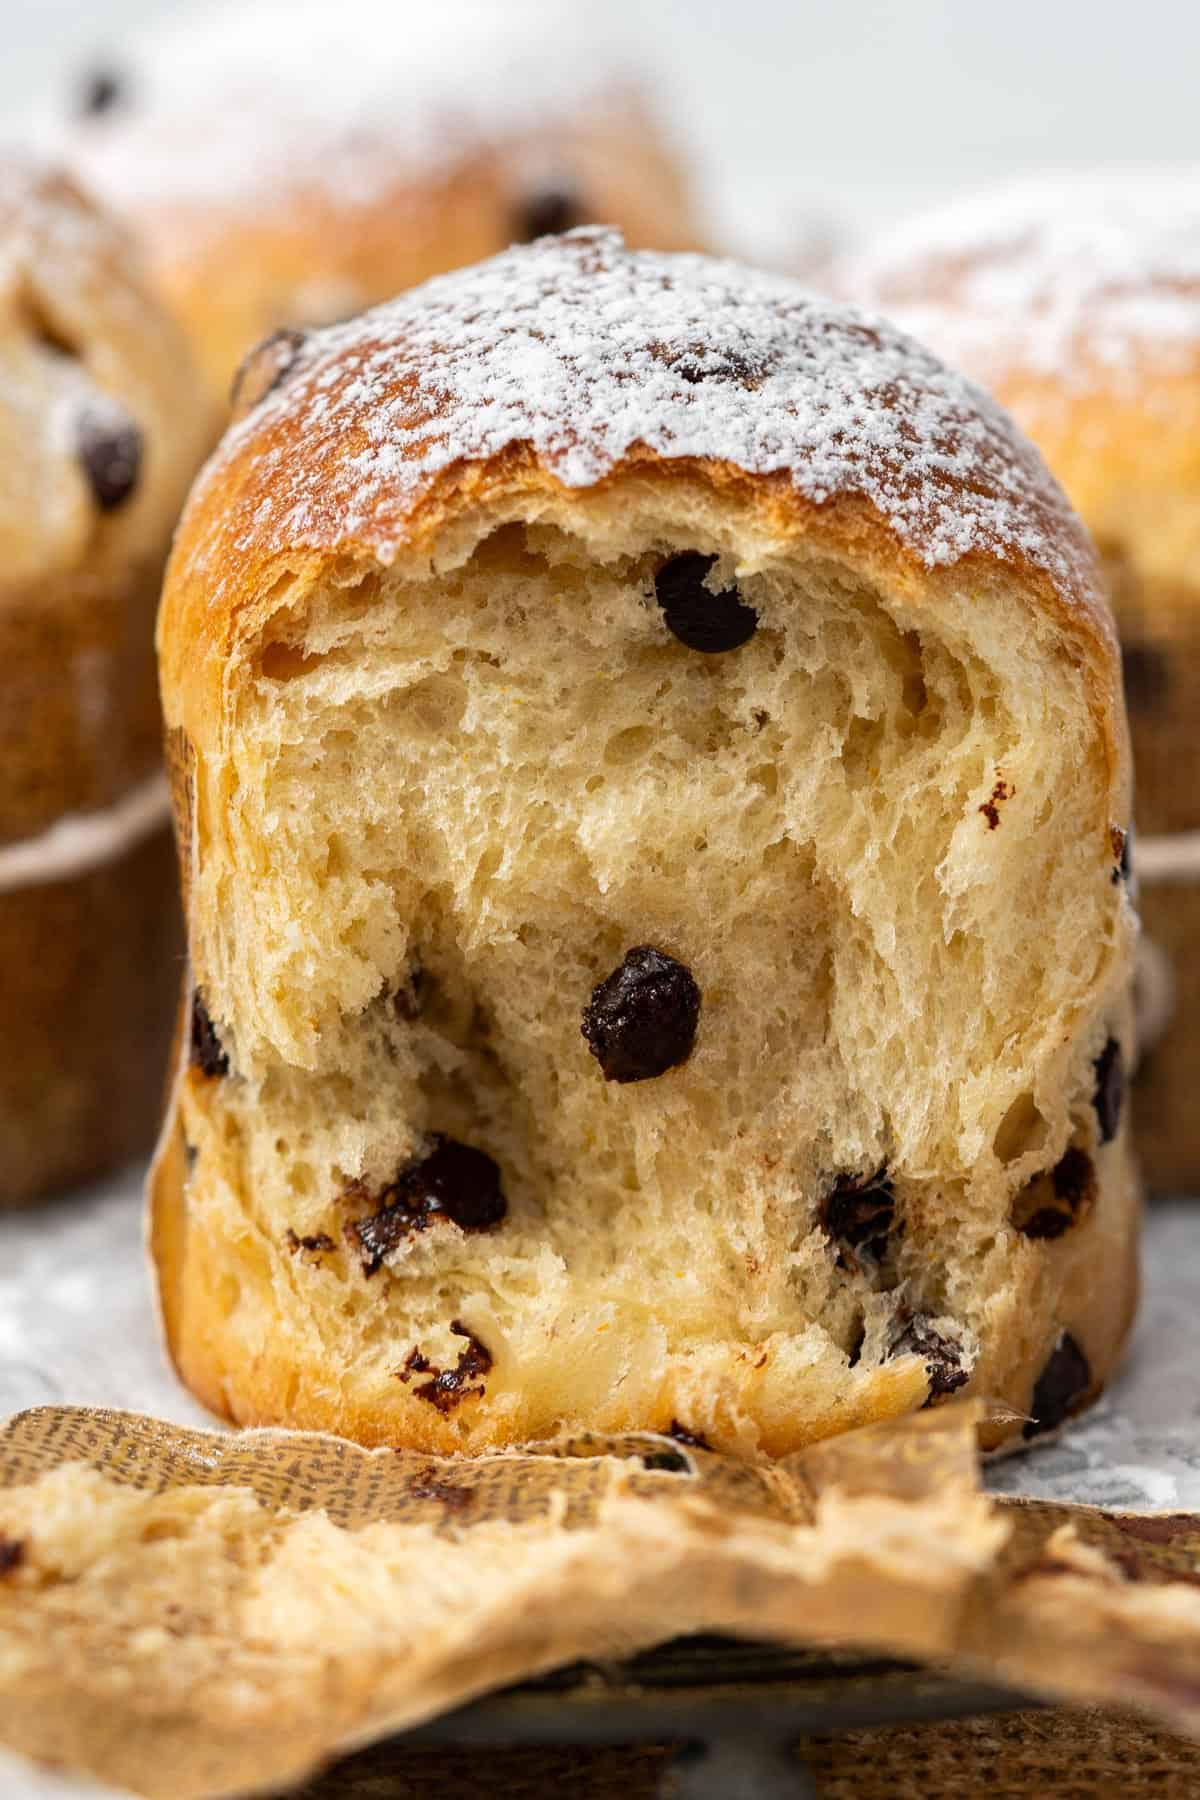 Showing the inside texture of a mini panettone with chocolate chips.